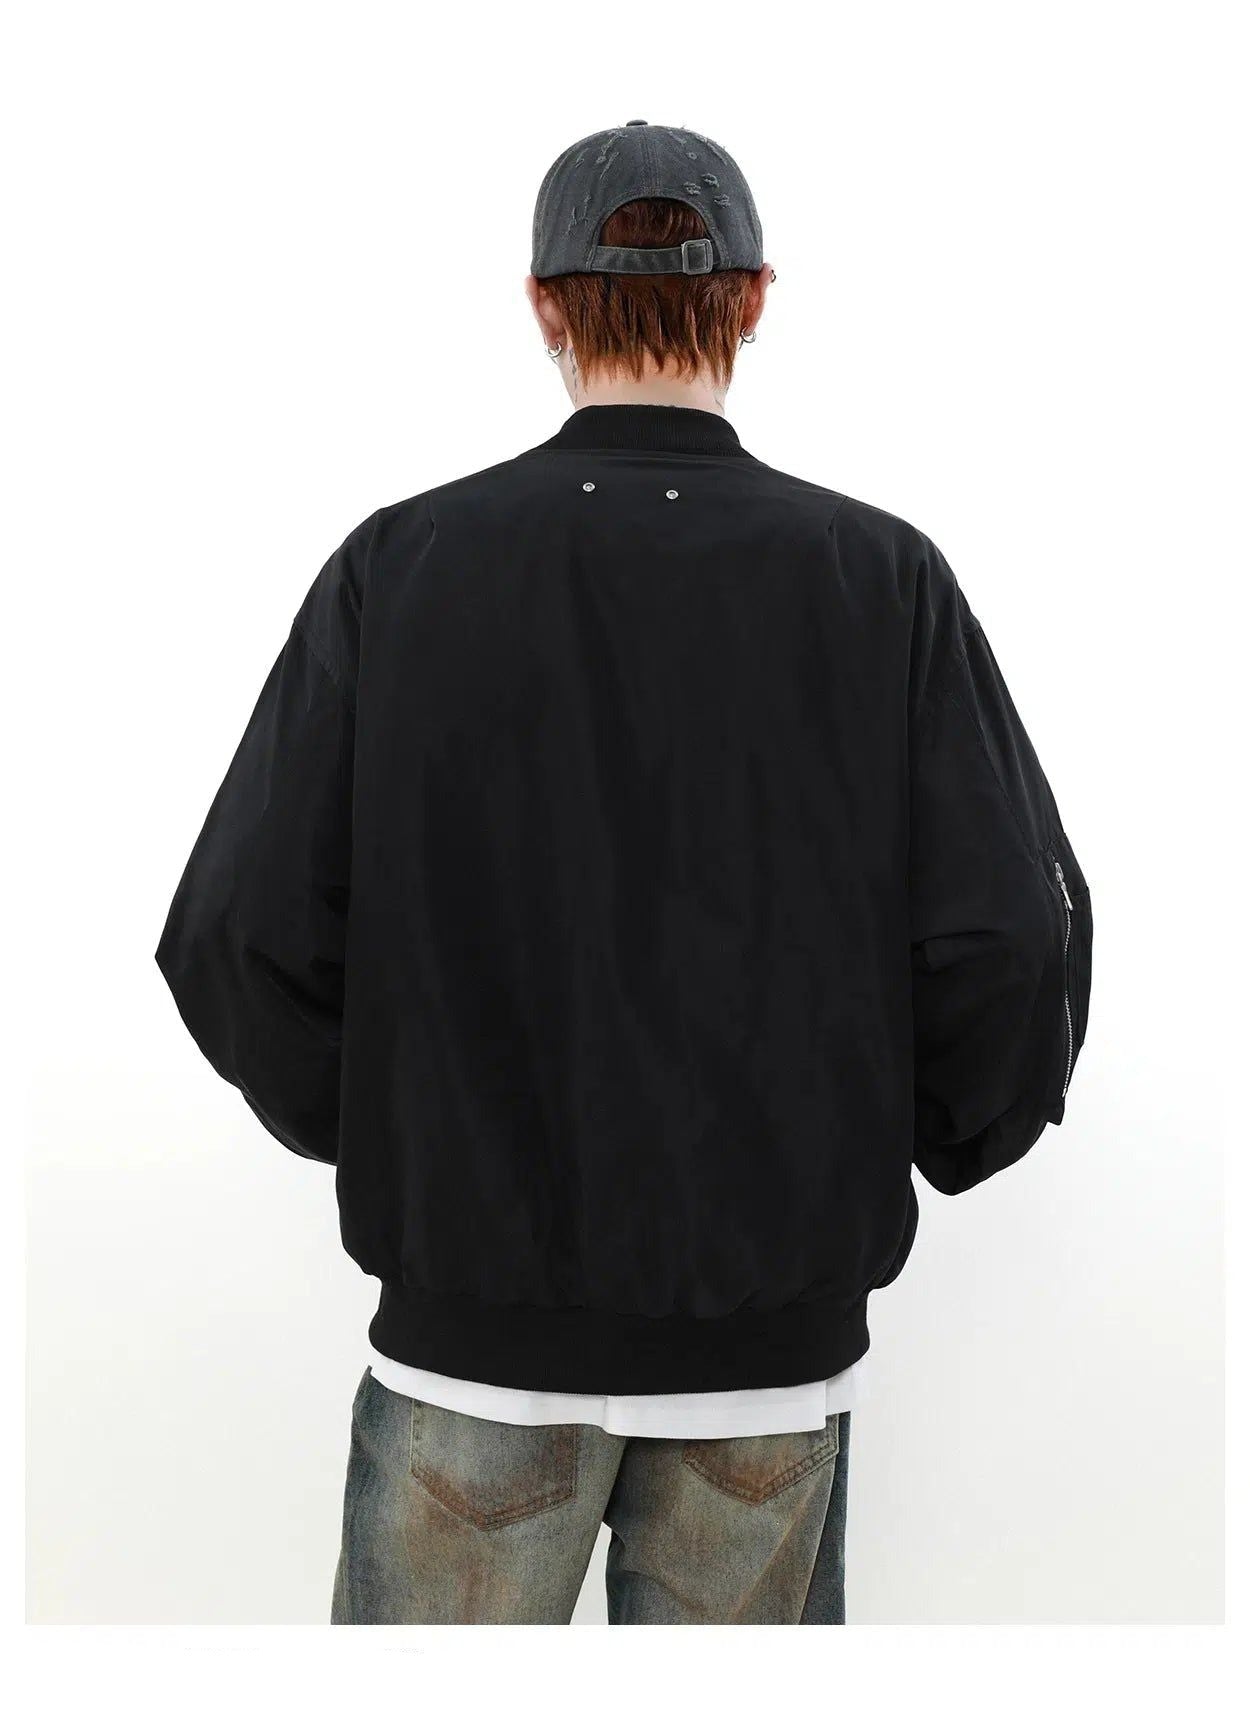 Plain Side Zip Bomber Jacket Korean Street Fashion Jacket By Mr Nearly Shop Online at OH Vault